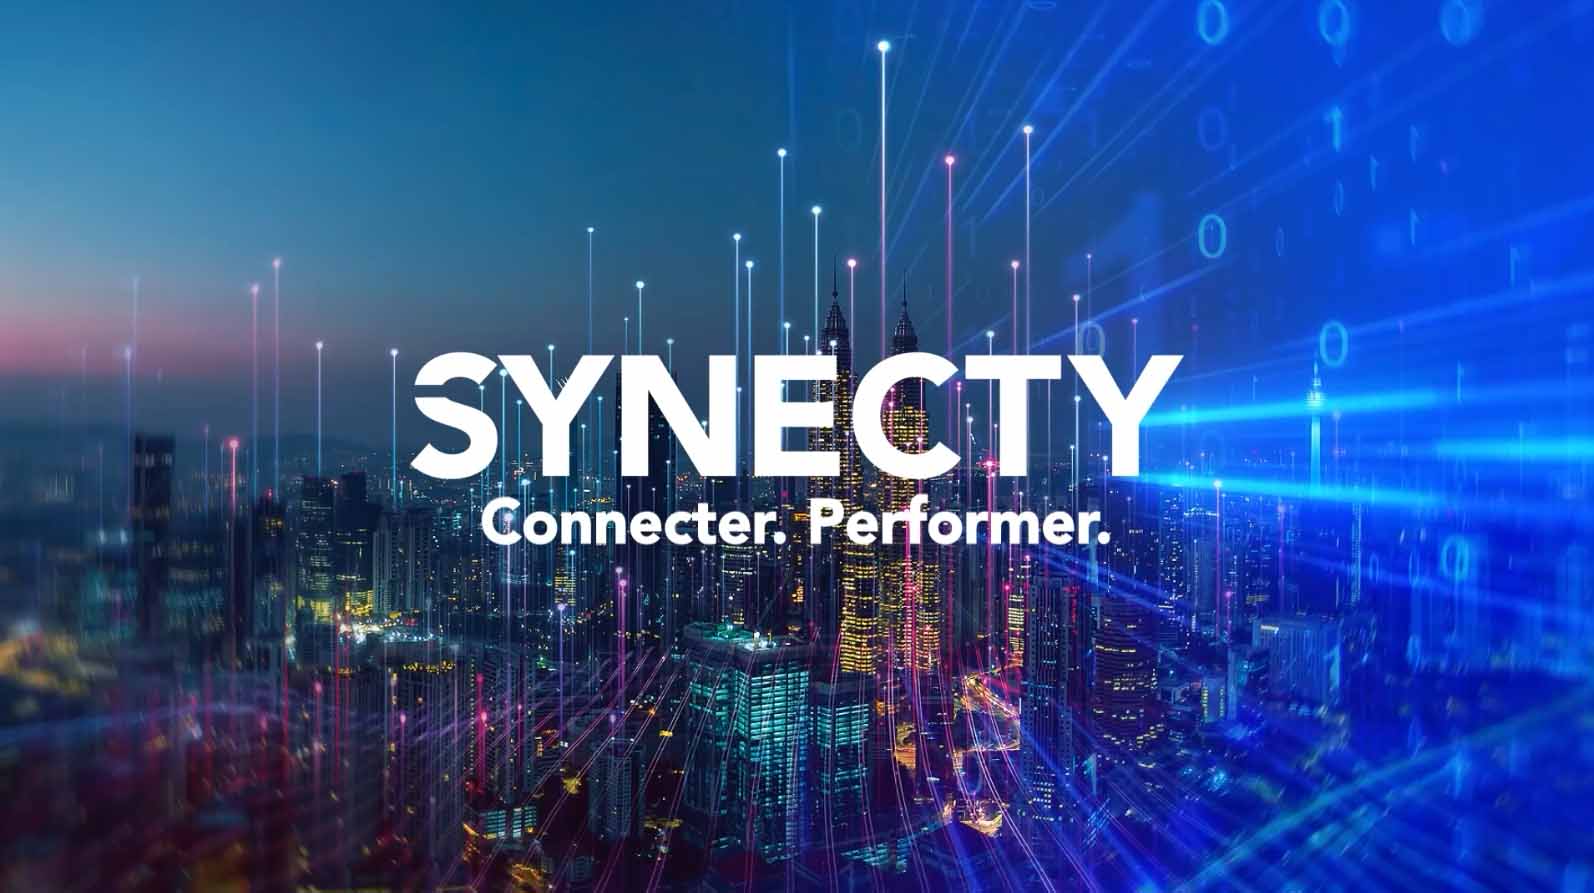 Synecty, the brand for mobile networks and connectivity by Eiffage Énergie Systèmes